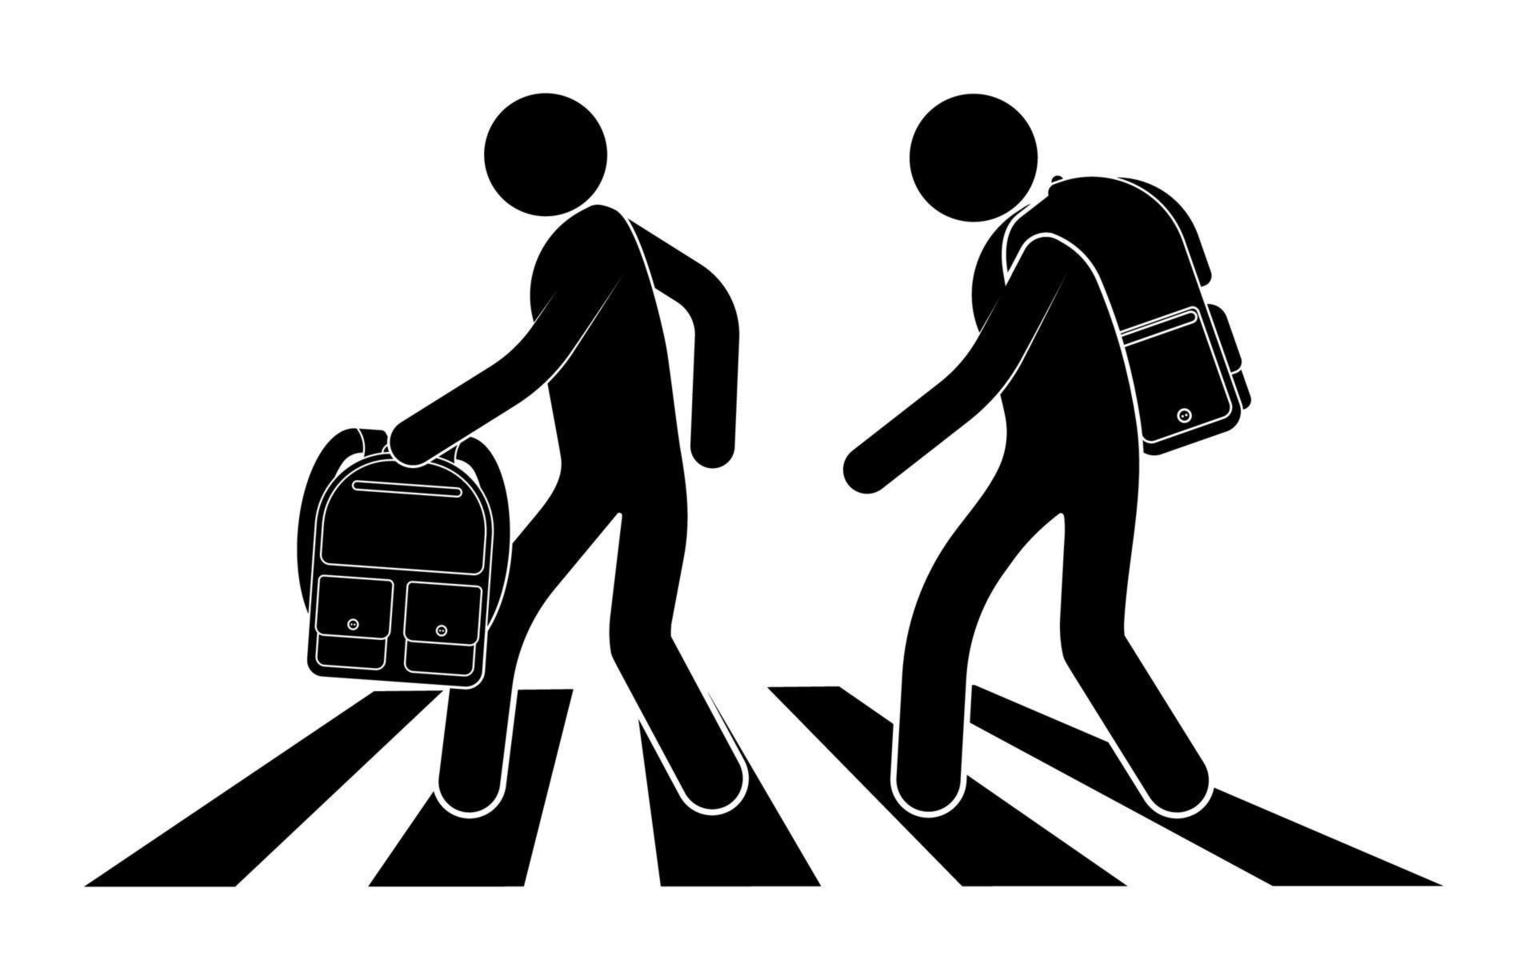 schoolchildren with backpacks cross the pedestrian crossing, street zebra. September 1 is beginning of the school year. Traffic safety on roads. Black and white vector